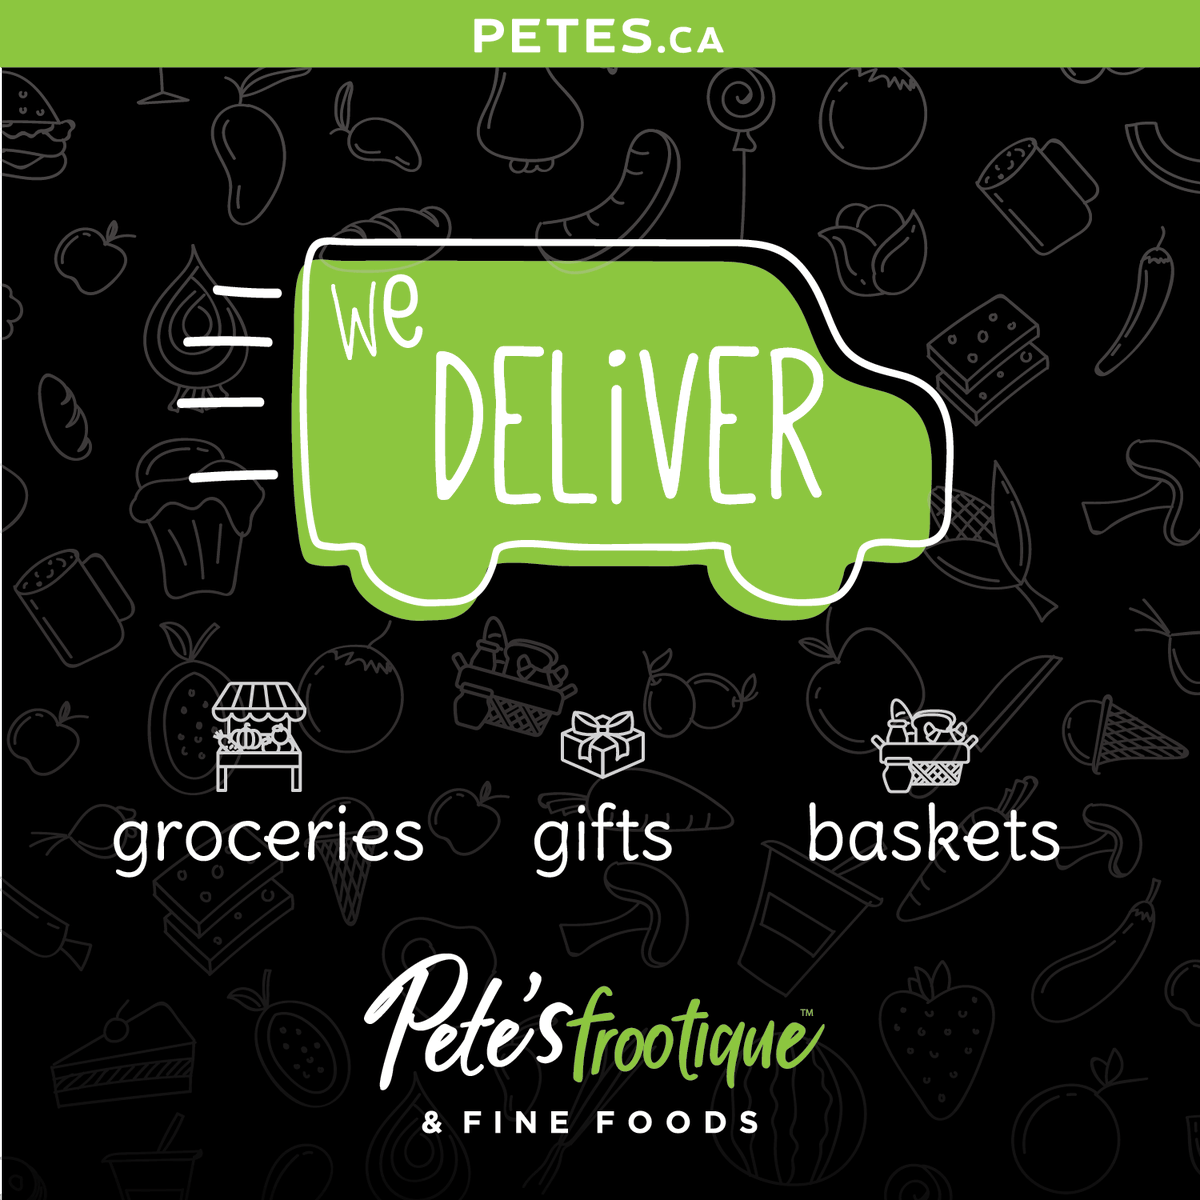 Did you know we deliver? Groceries, gift baskets and floral! Find more information at petes.ca #shop #deliver #gifts #hrm #petesfrootique